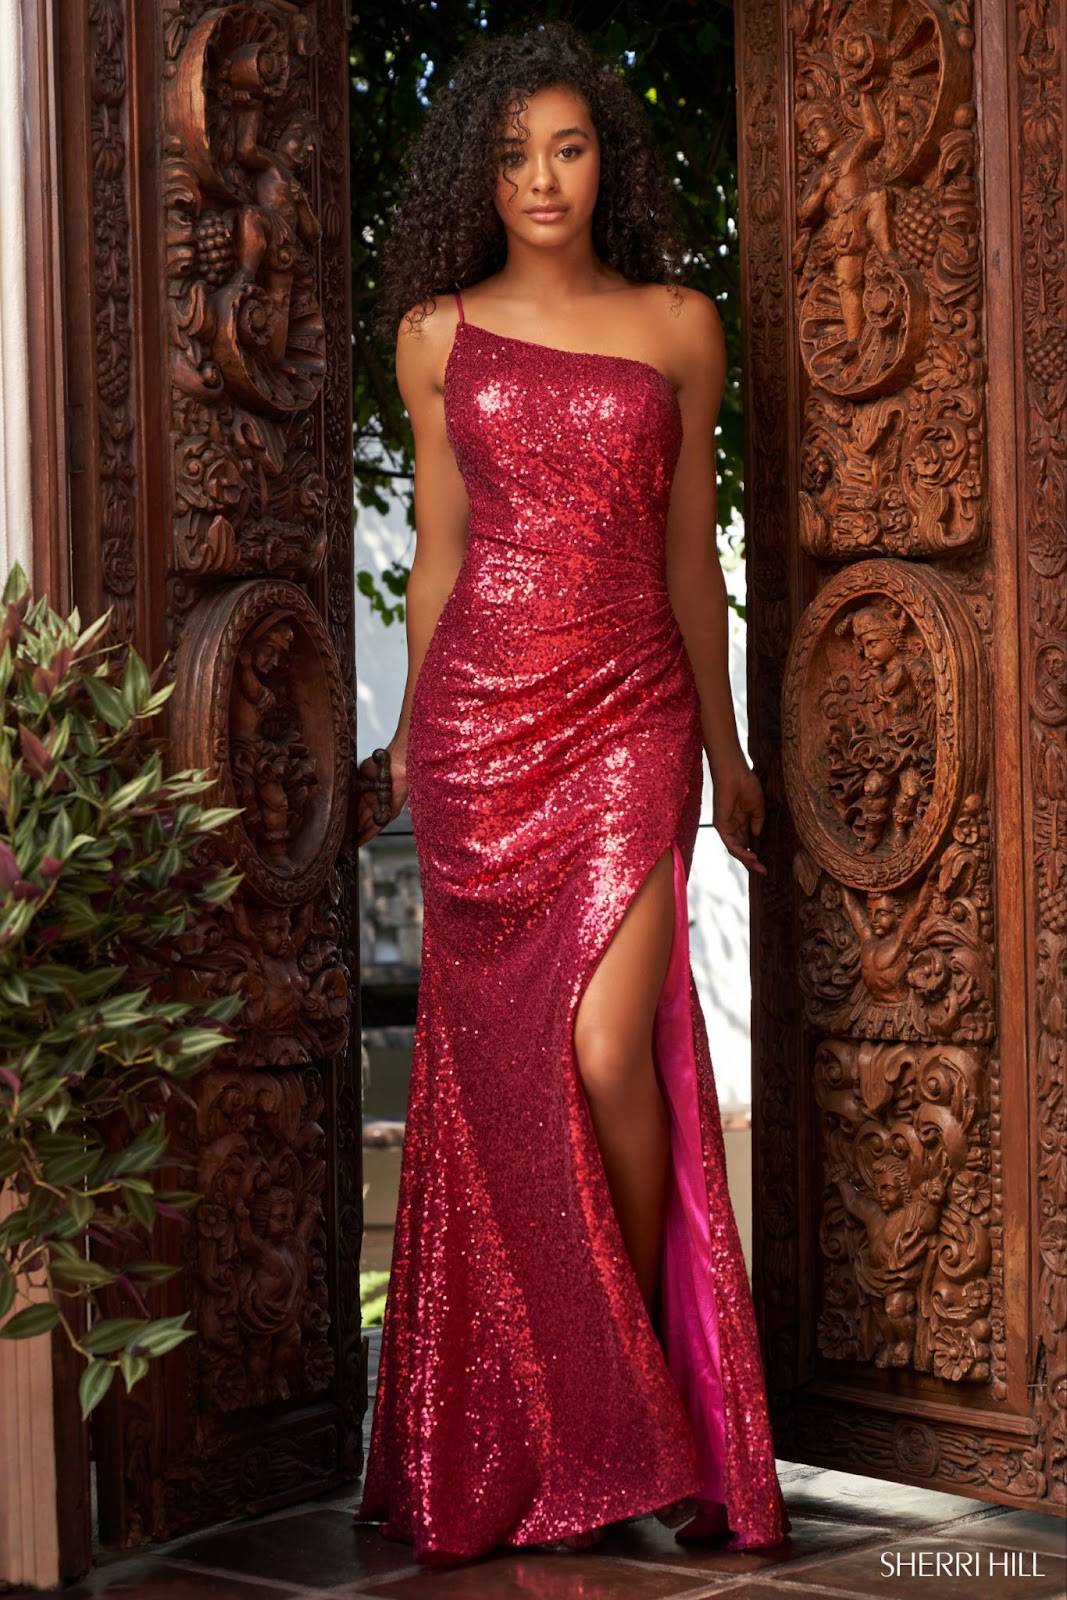 The Finest Glittering Prom Dresses to Light Up Your Evening: Shine Like a Diamond Image